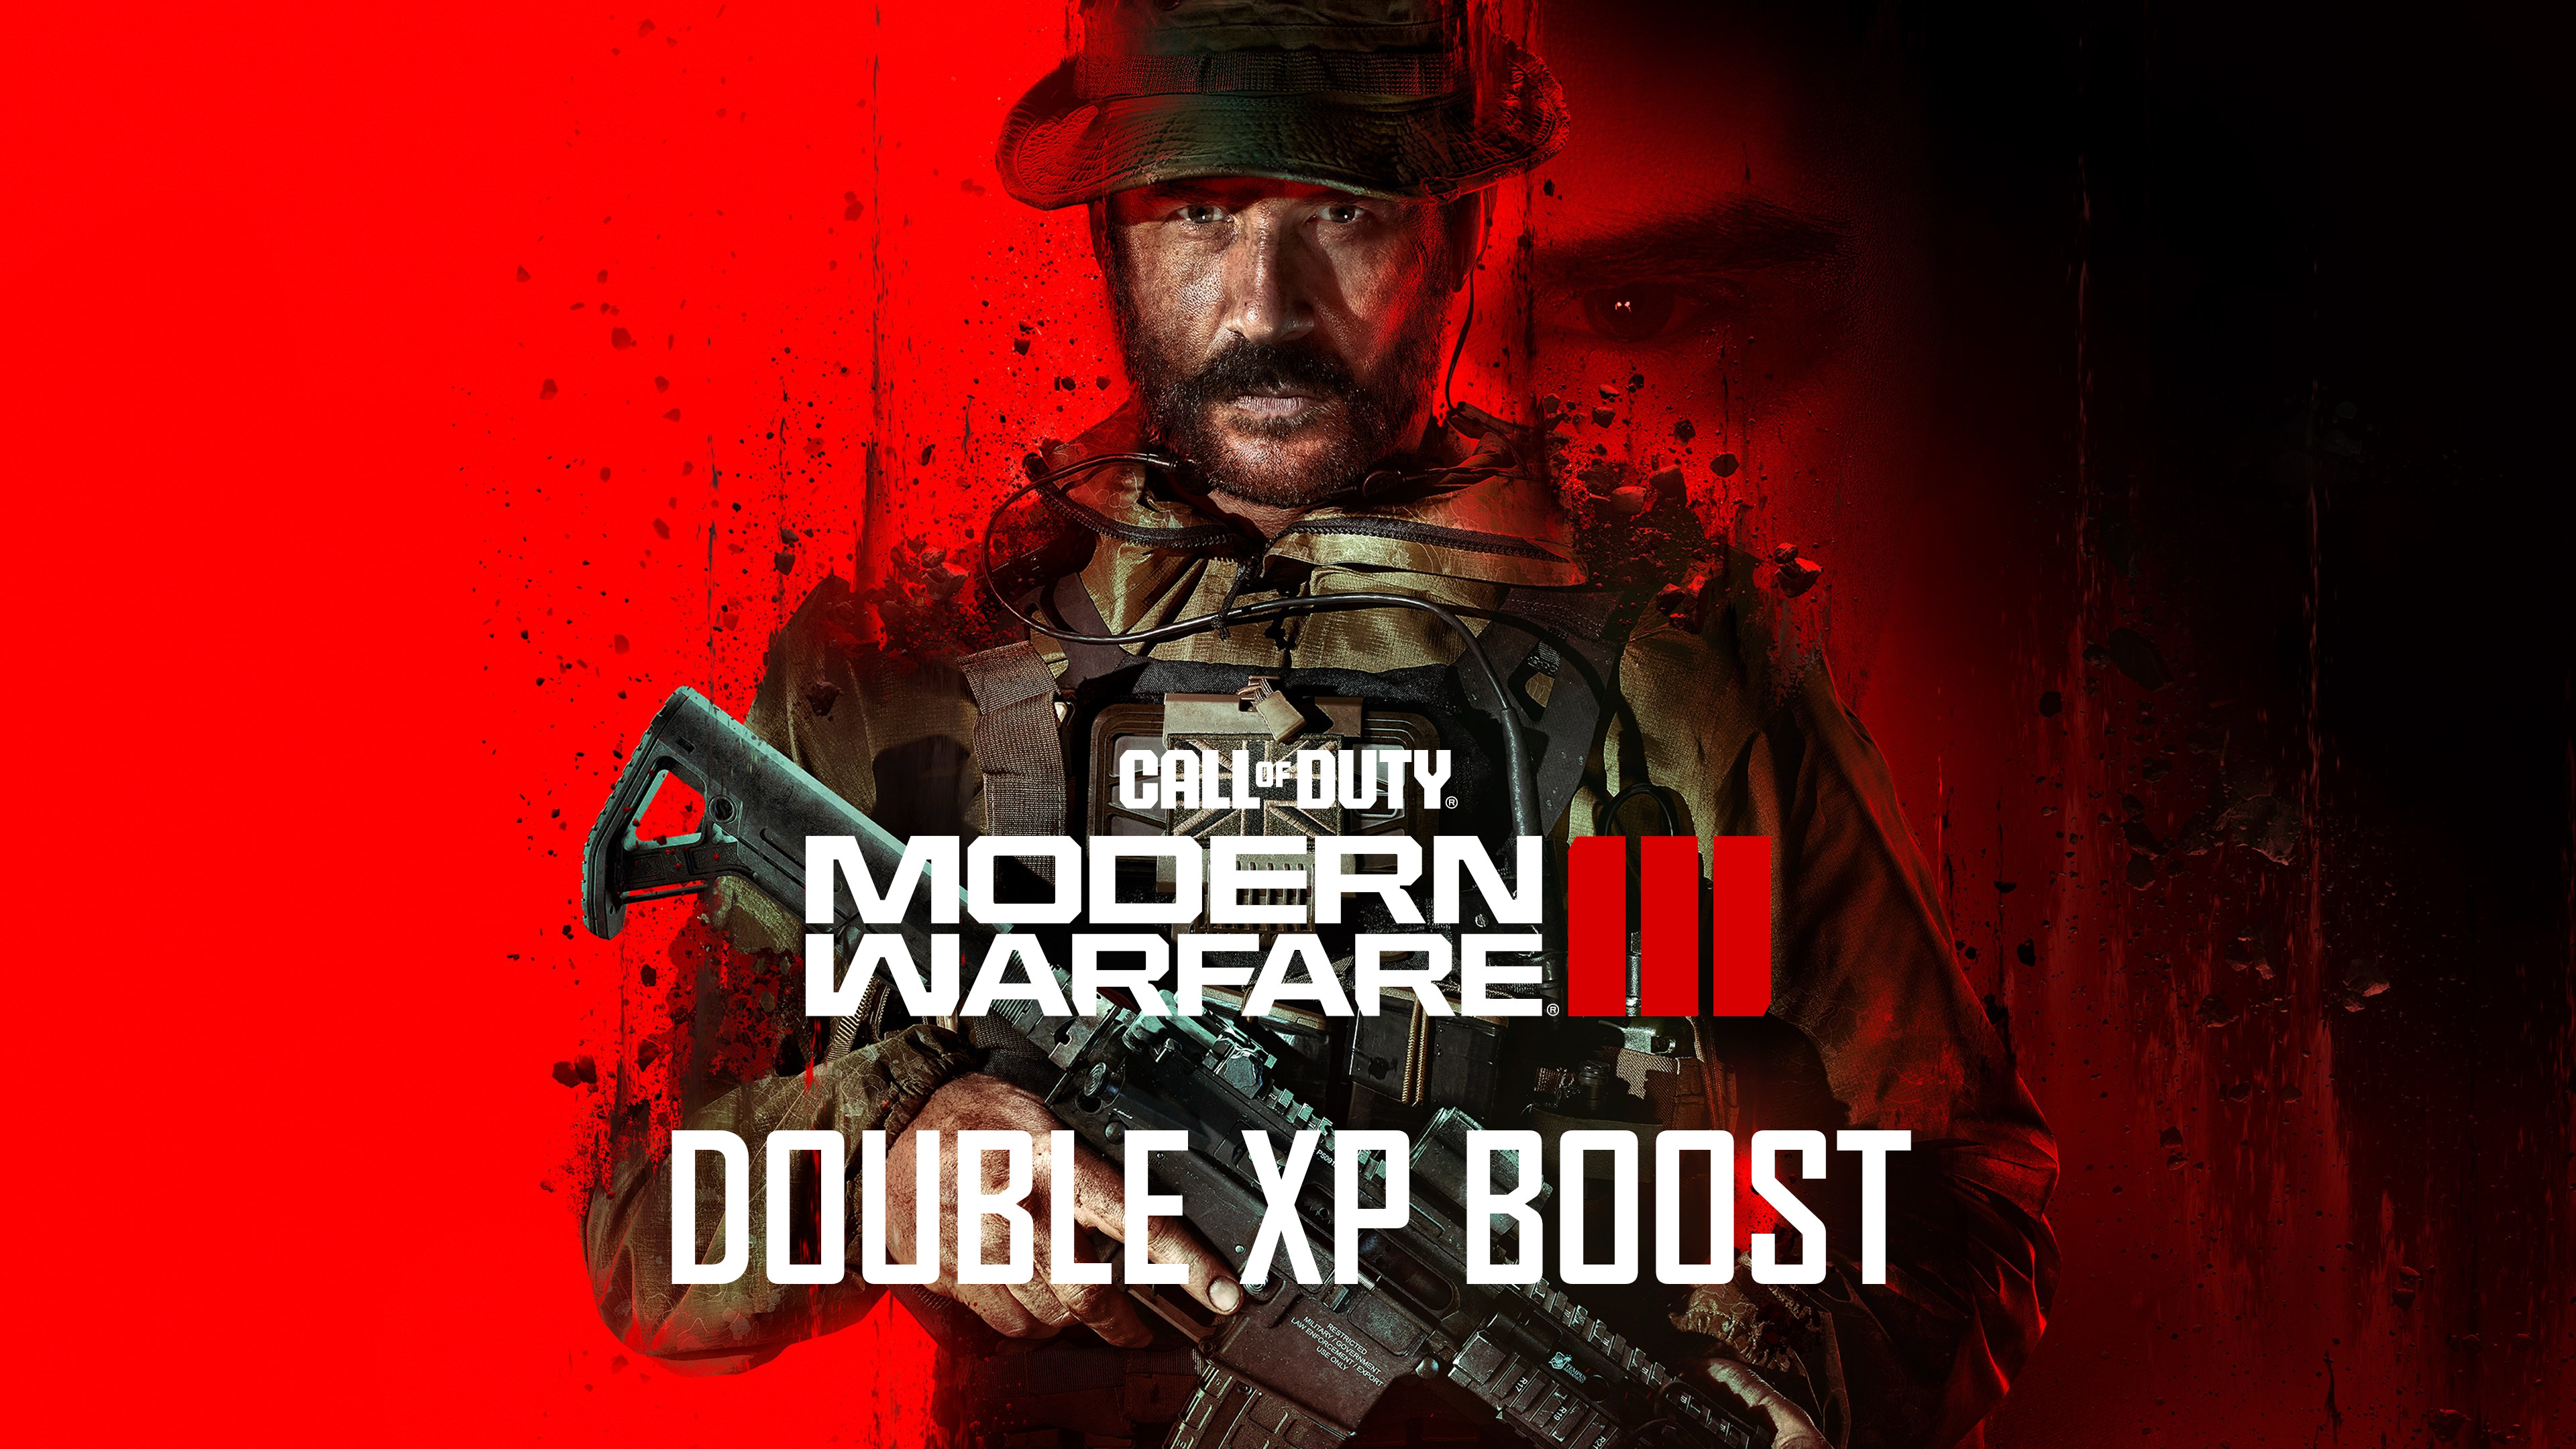 Call of Duty: Modern Warfare III - 3 Hours Double XP Boost PC/PS4/PS5/XBOX One/Series X|S CD Key 1.93$